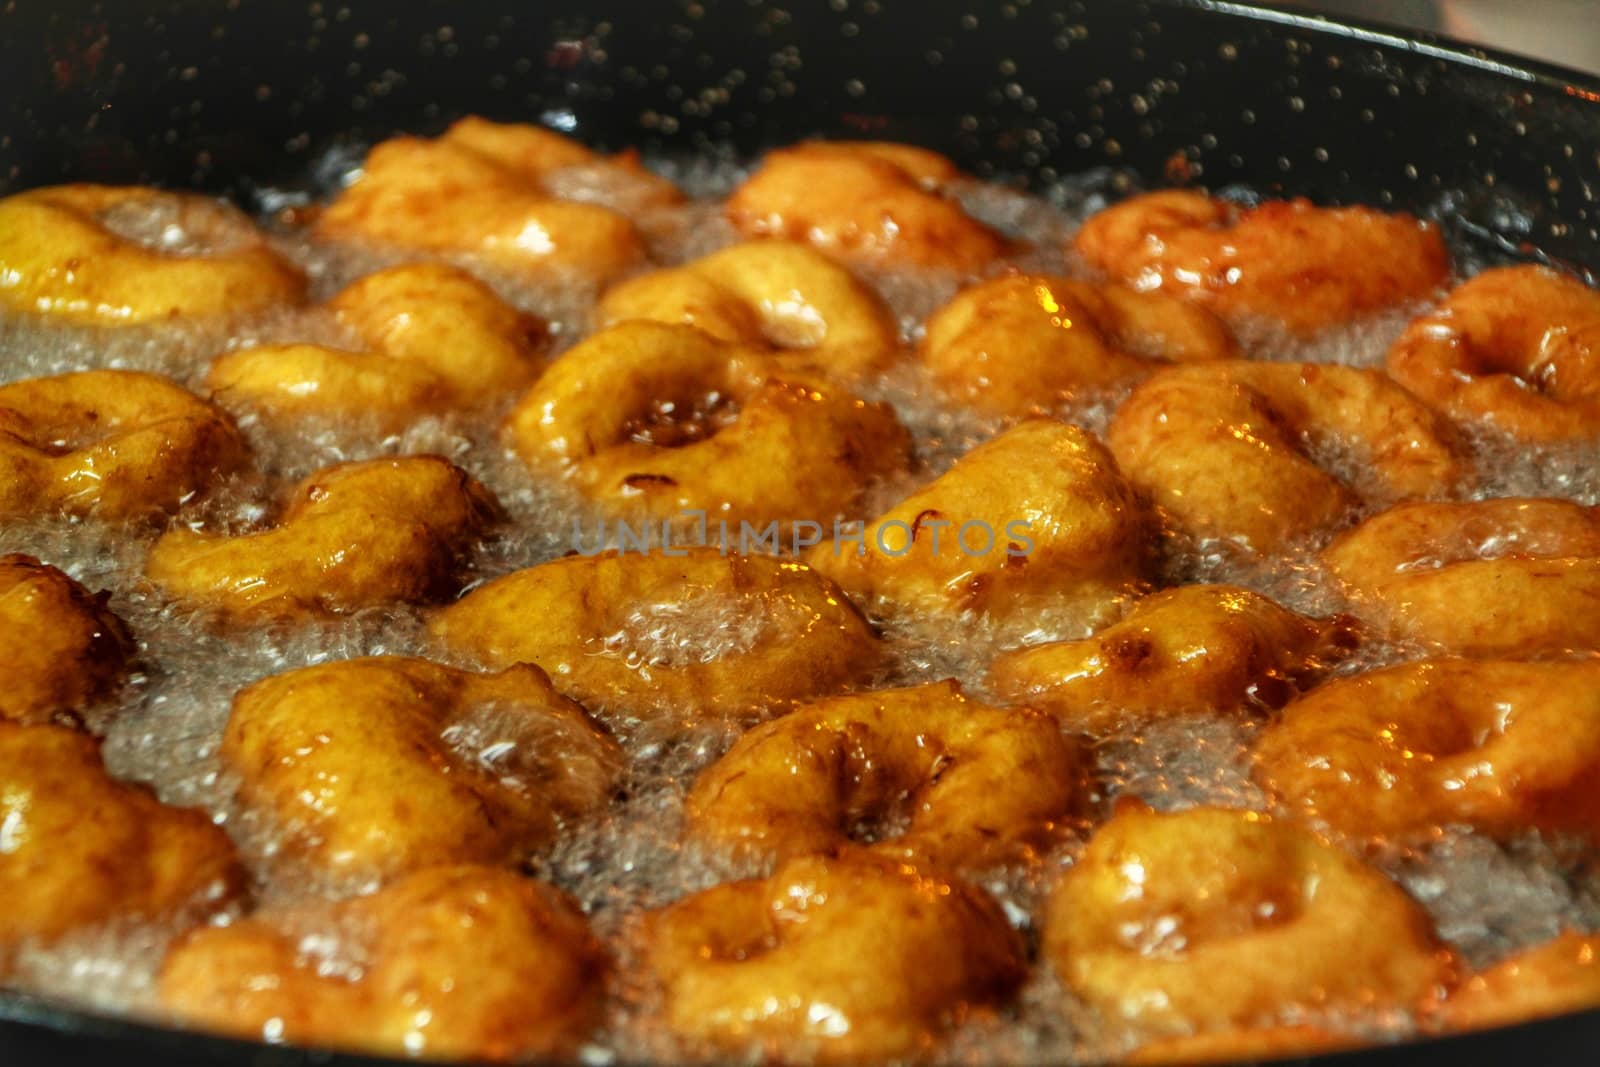 Pumpkin fritters in boiling oil at a street stall by soniabonet